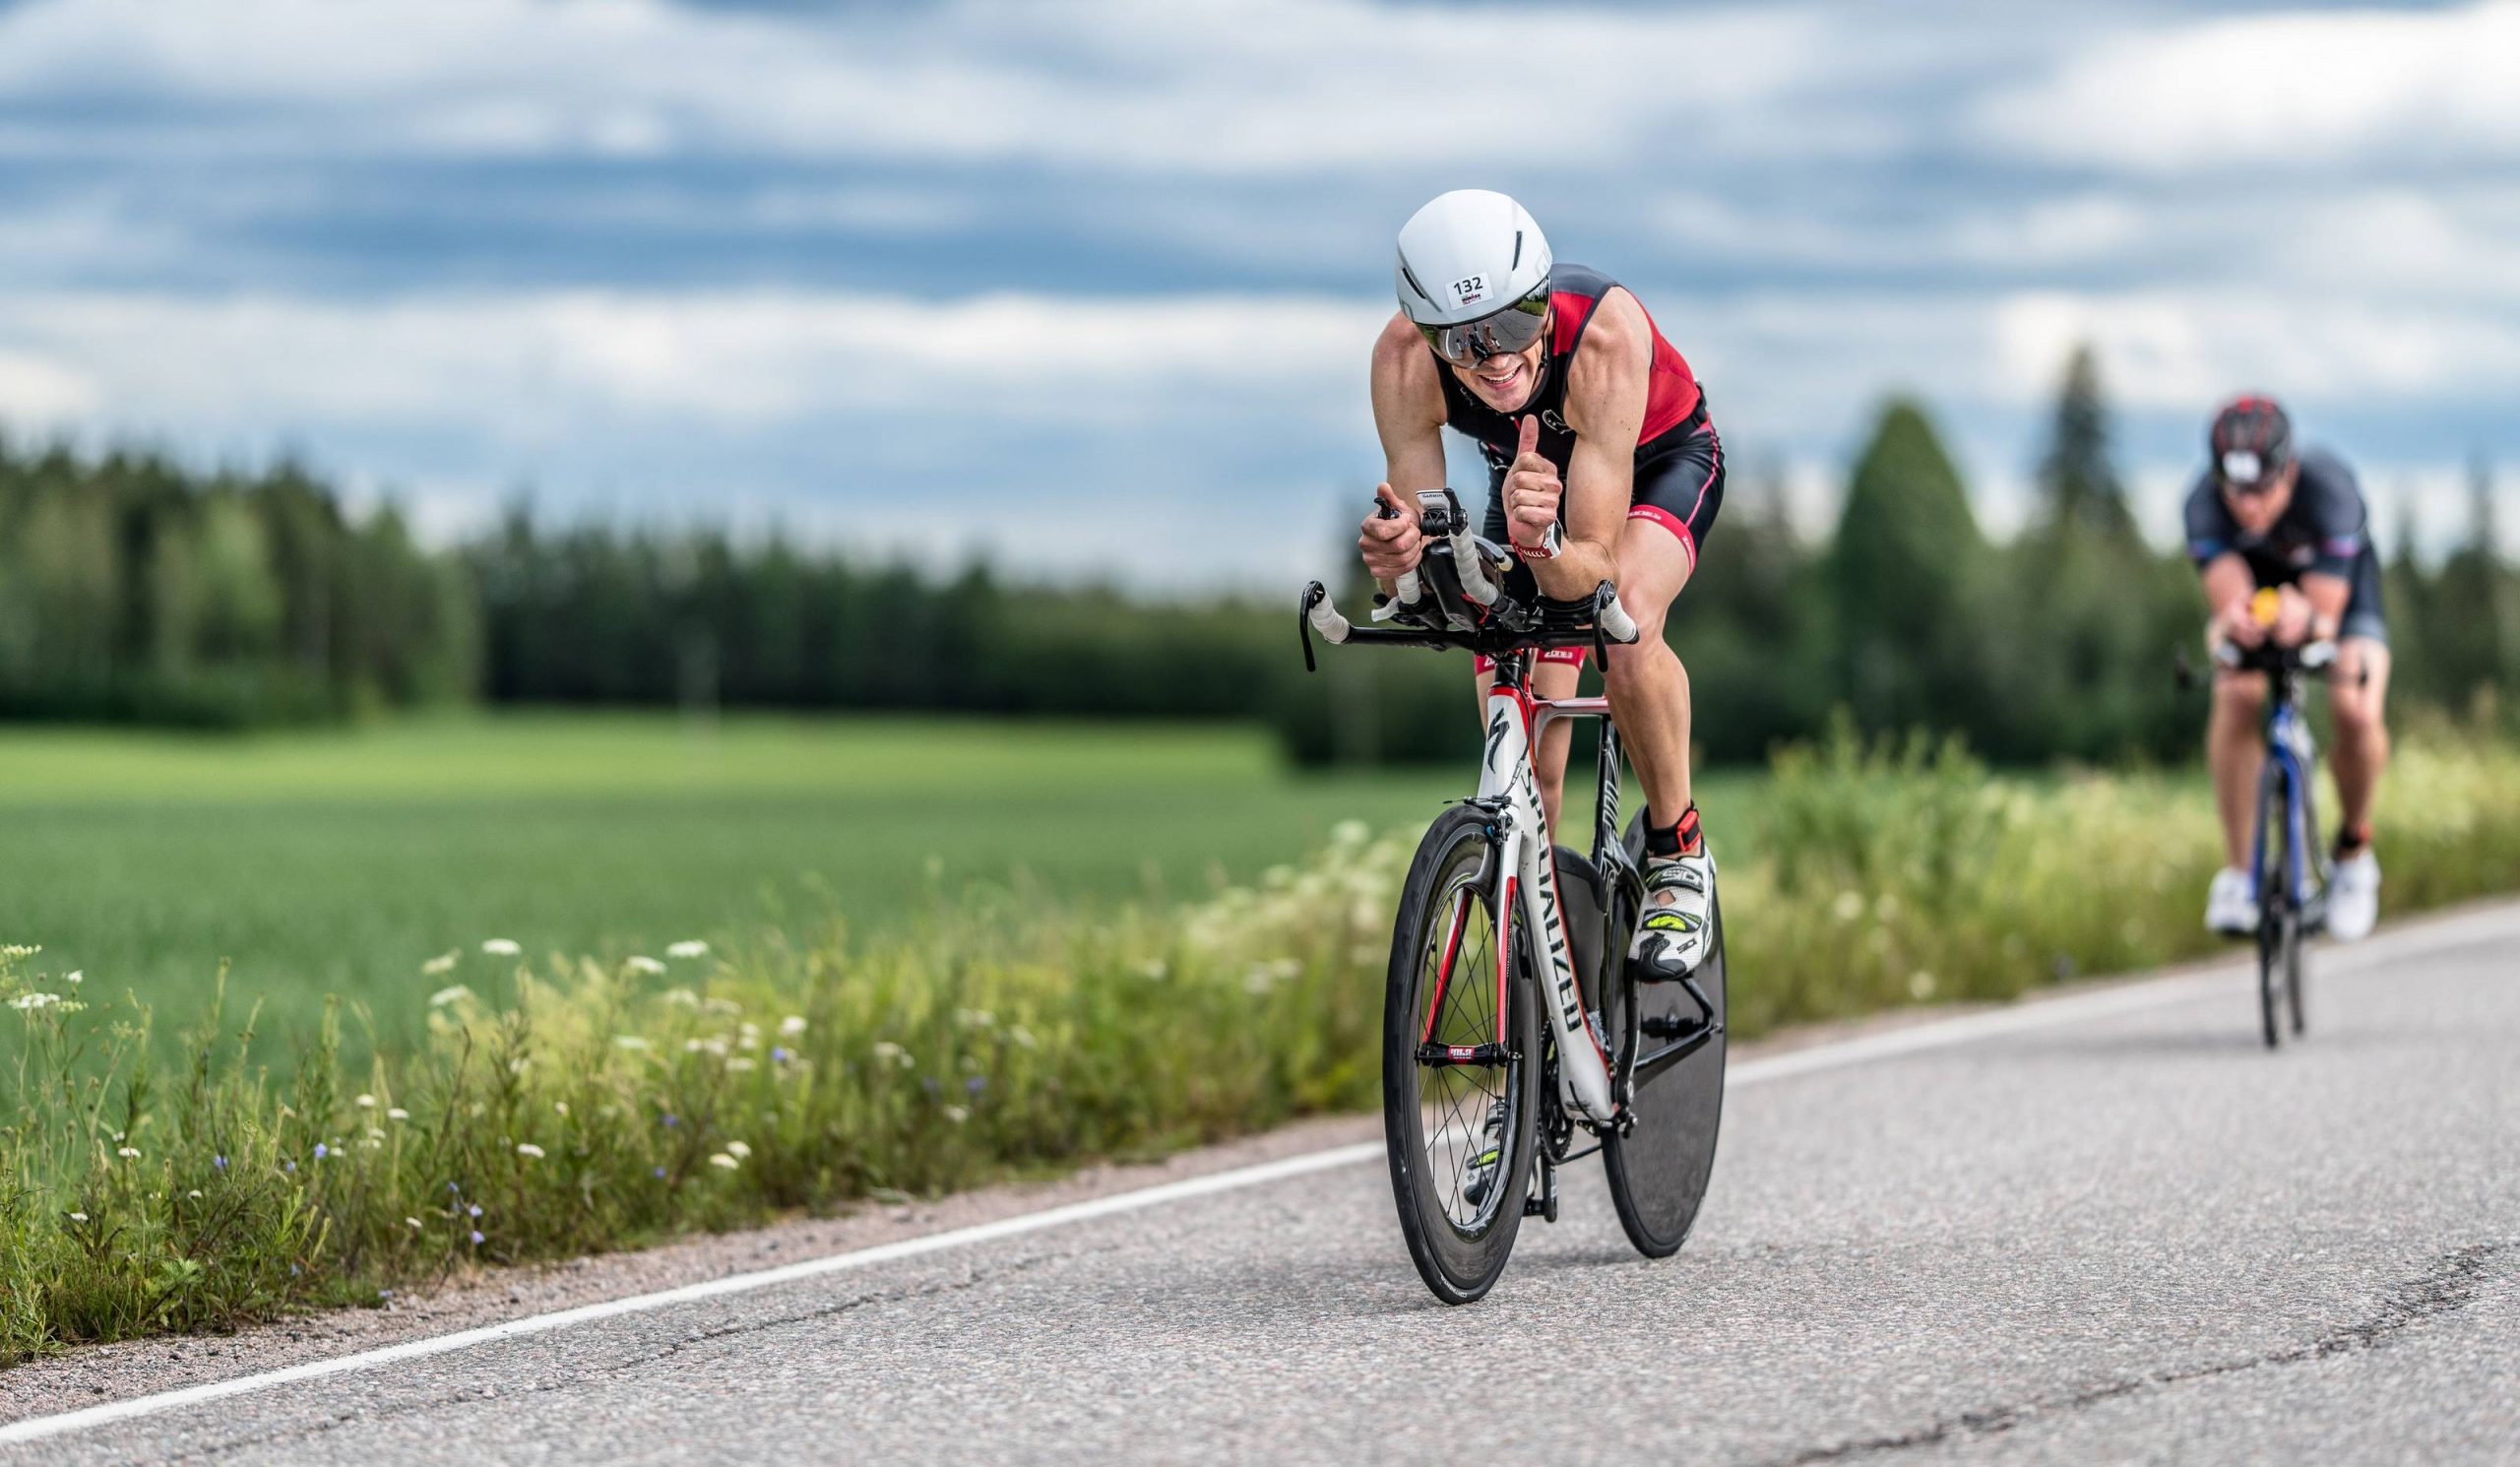 Man-cycling-on-a-bike-at-Ironman-triathlon-competition-in-Finland-scaled